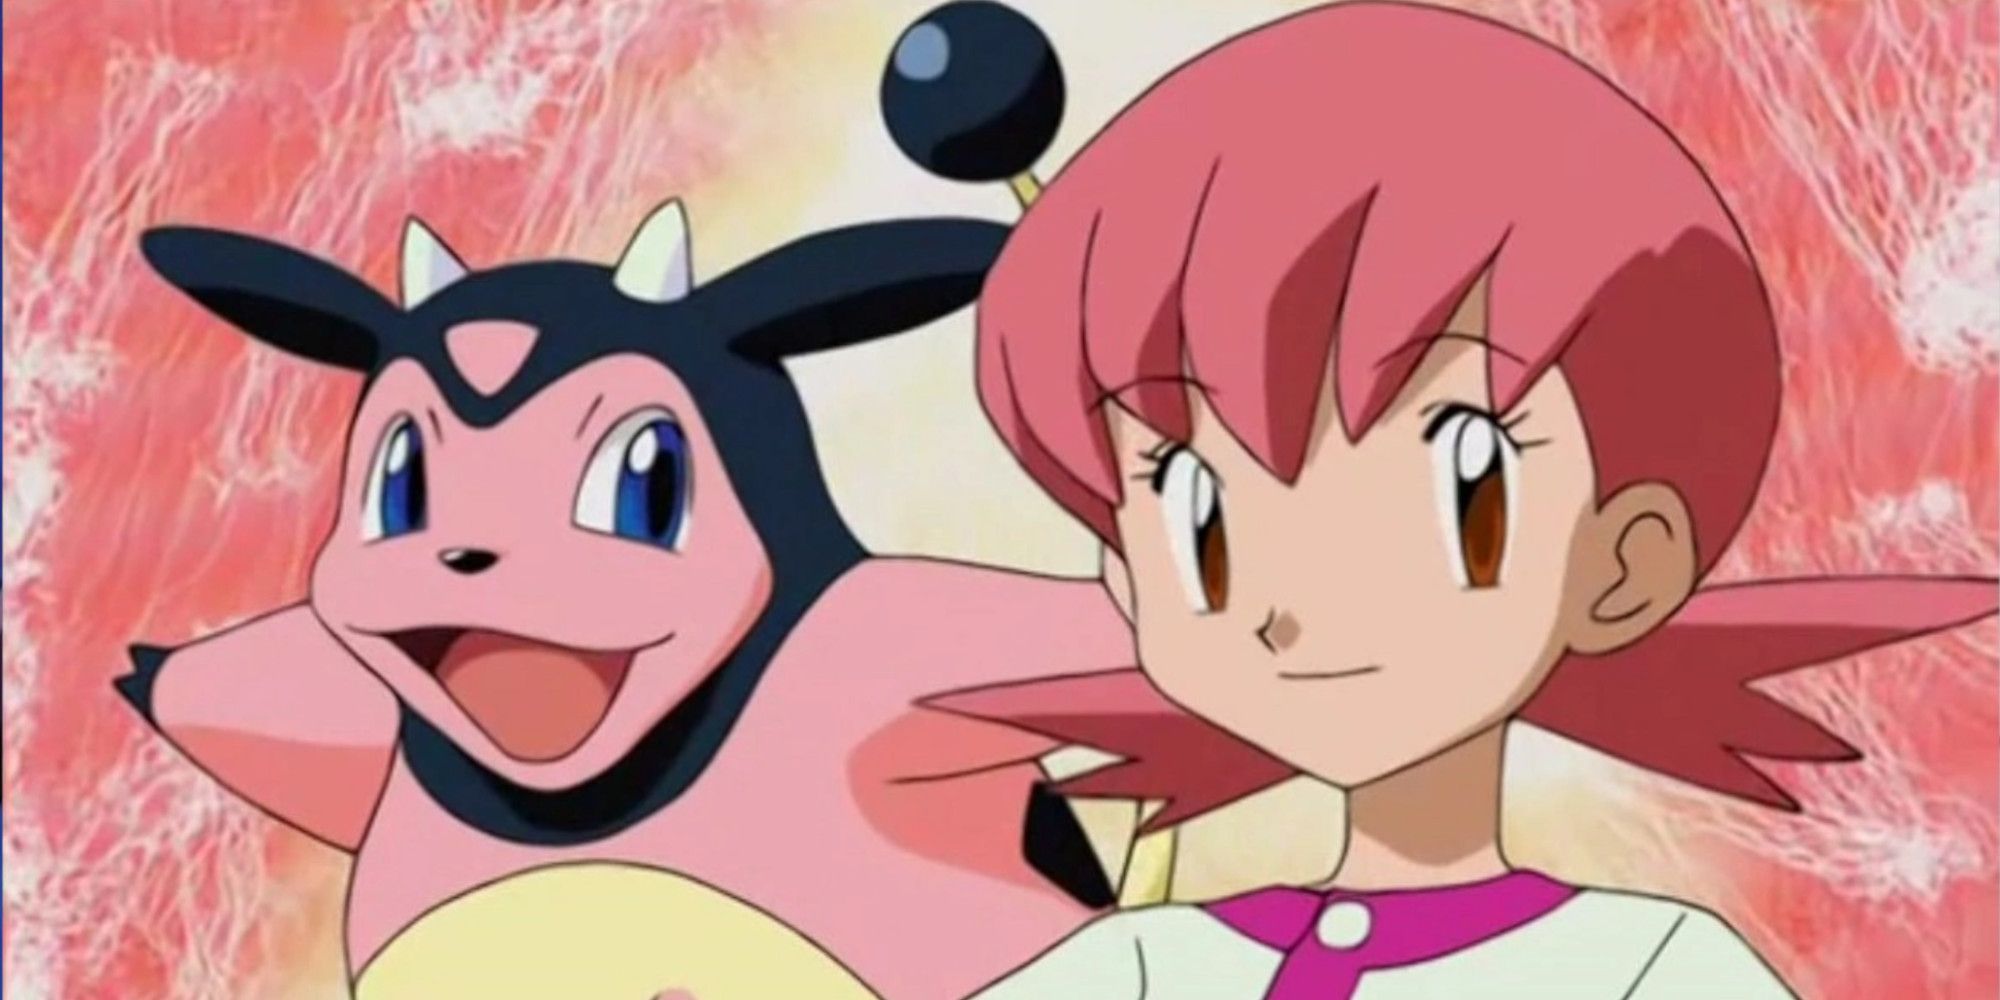 Whitney and her ace, Miltank, smile as they prepare to use Rollout.